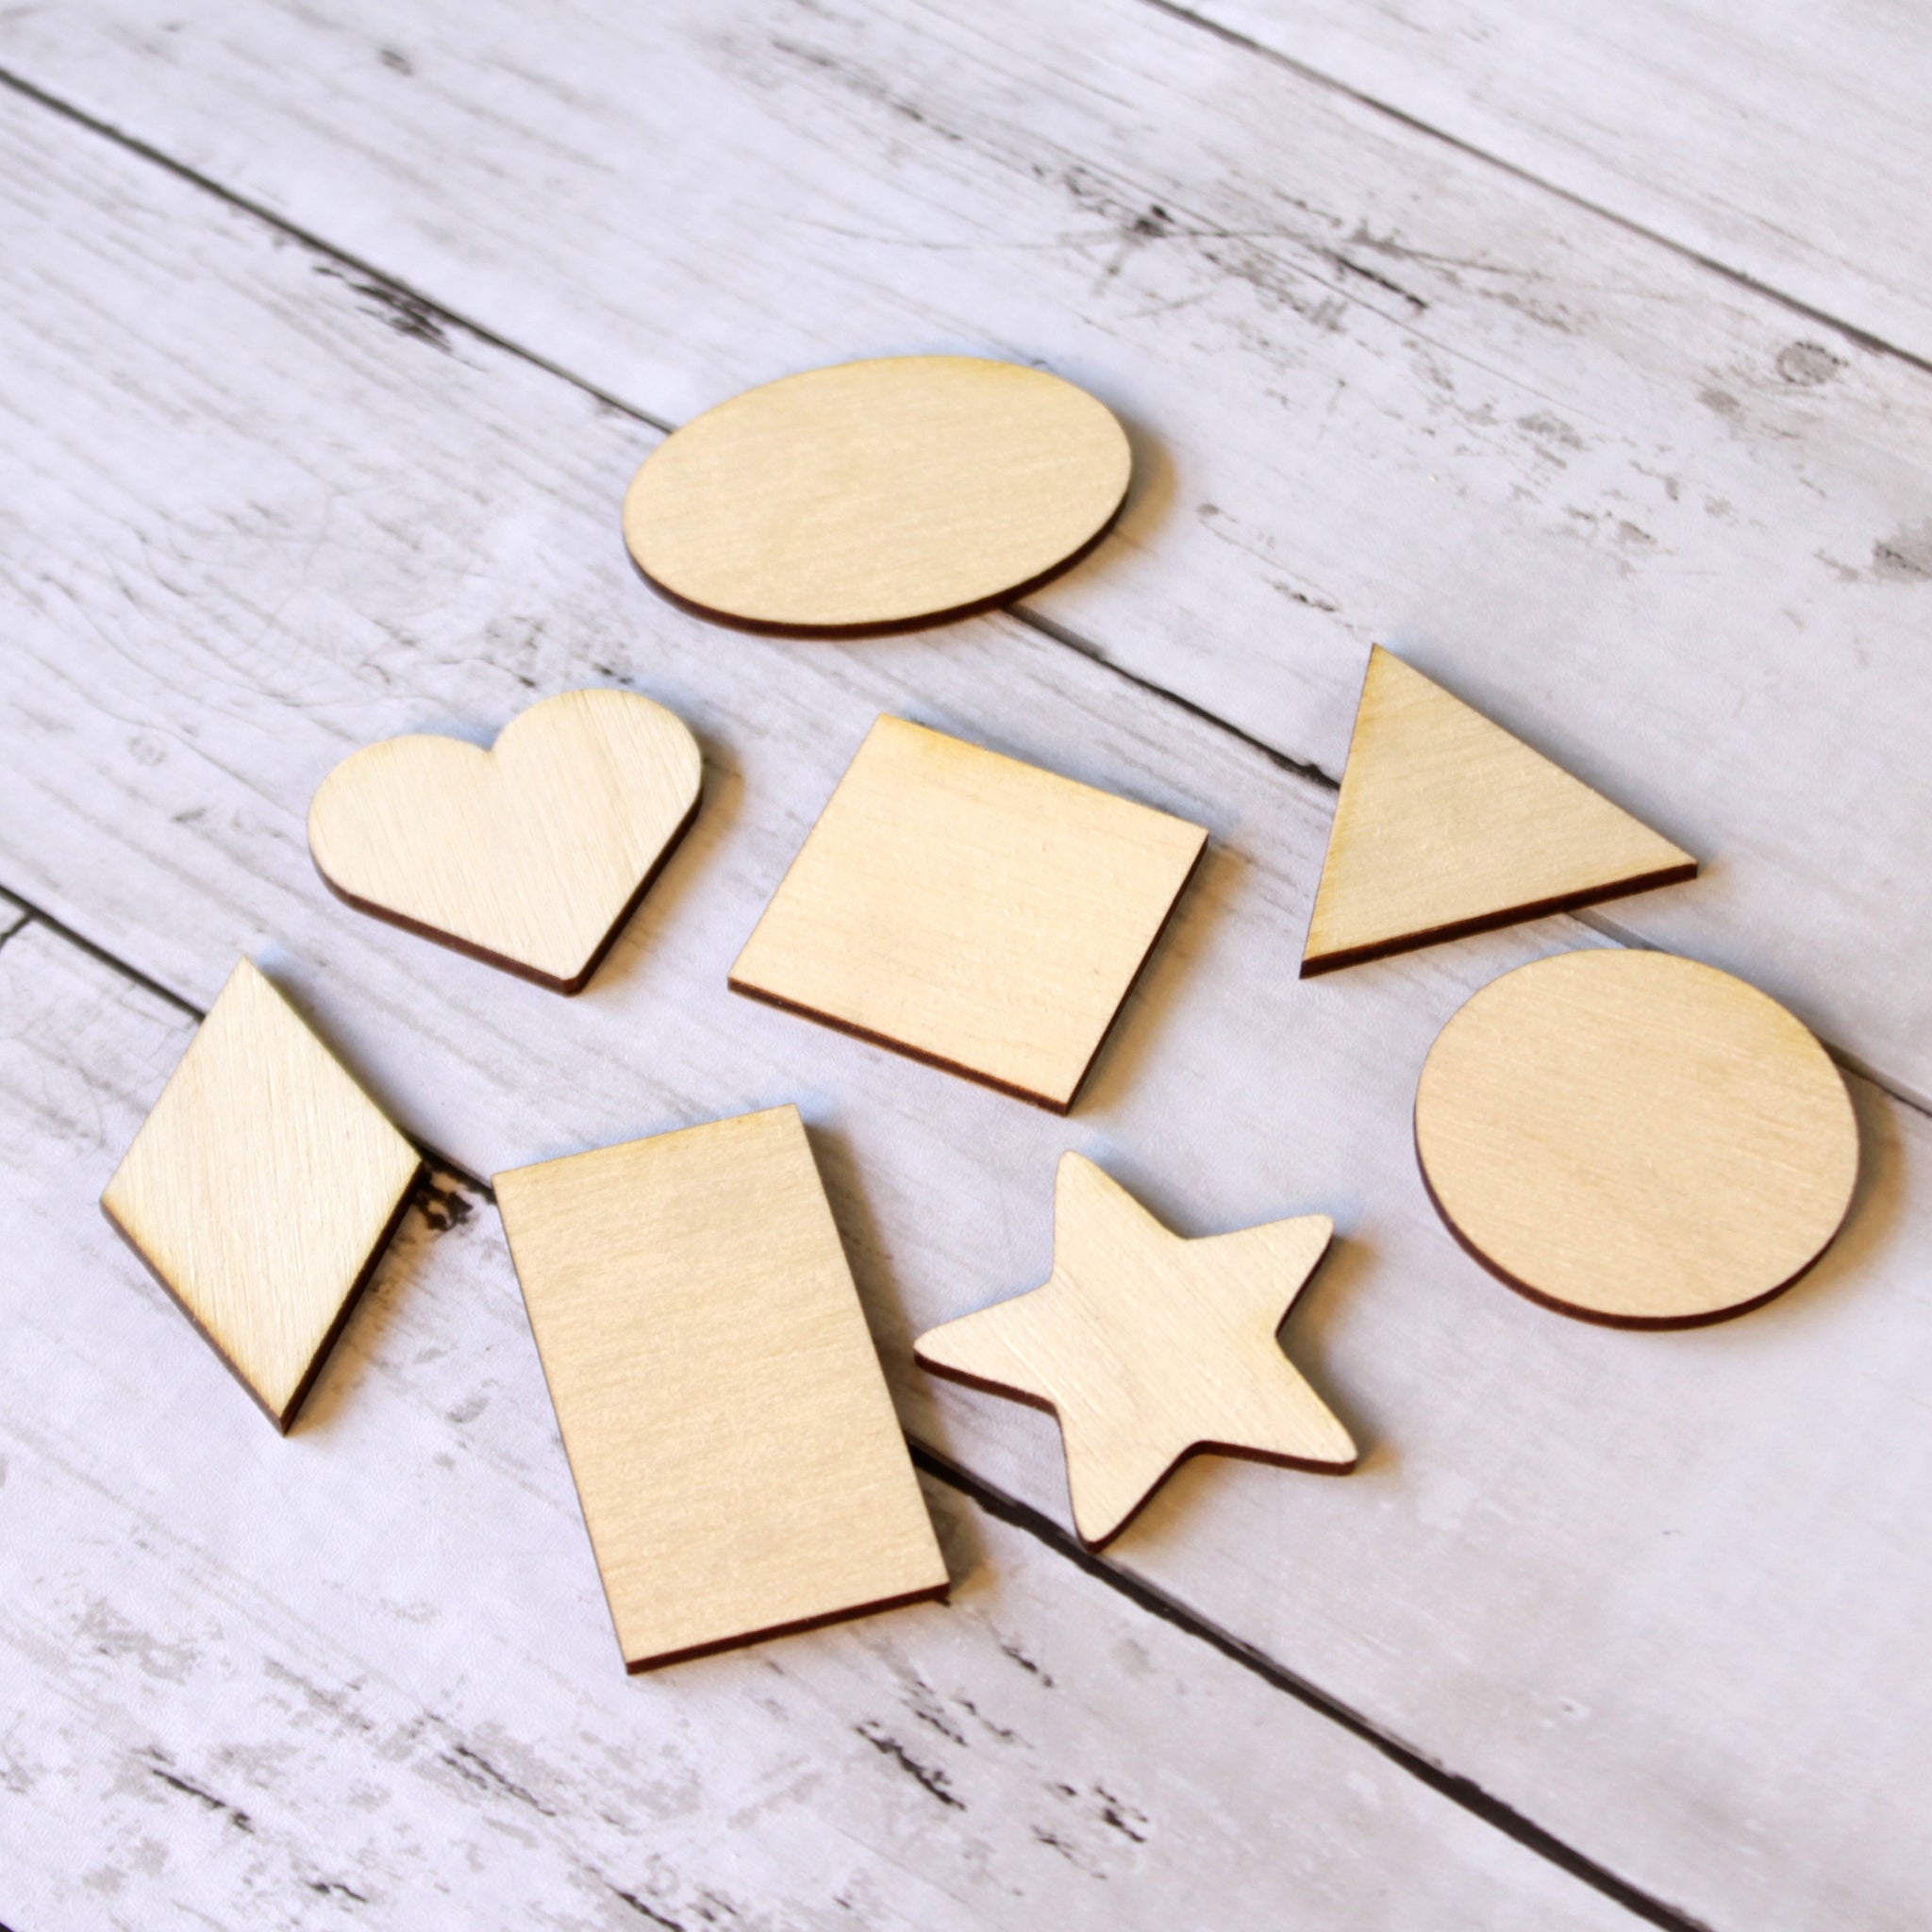 Basic Geometric Shapes, Wooden Set of 7 – Epicycle Designs